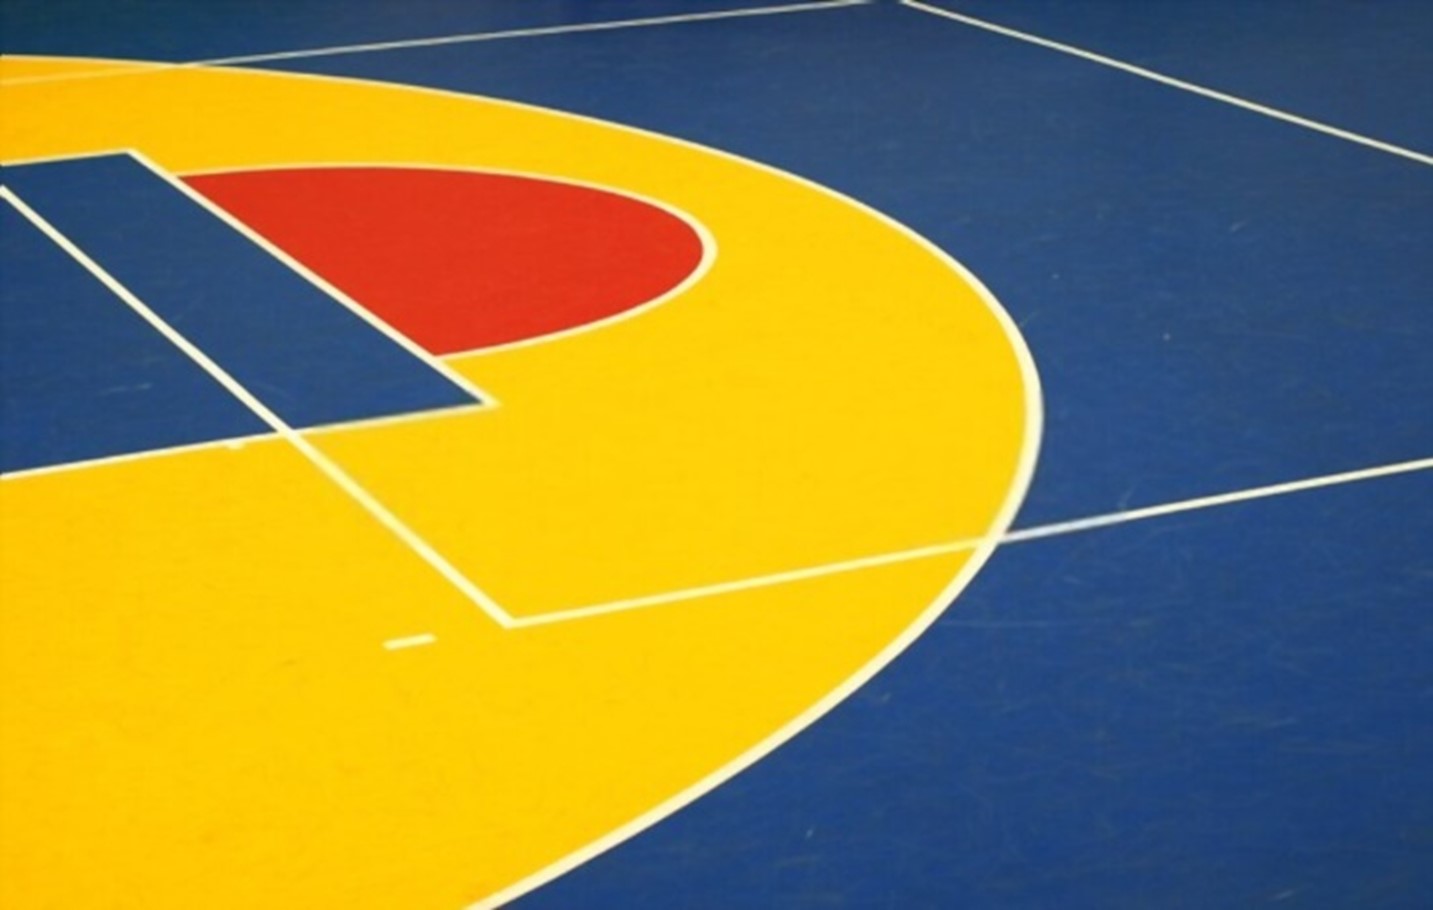 Types of Sports Flooring and How to Choose the Right One for You